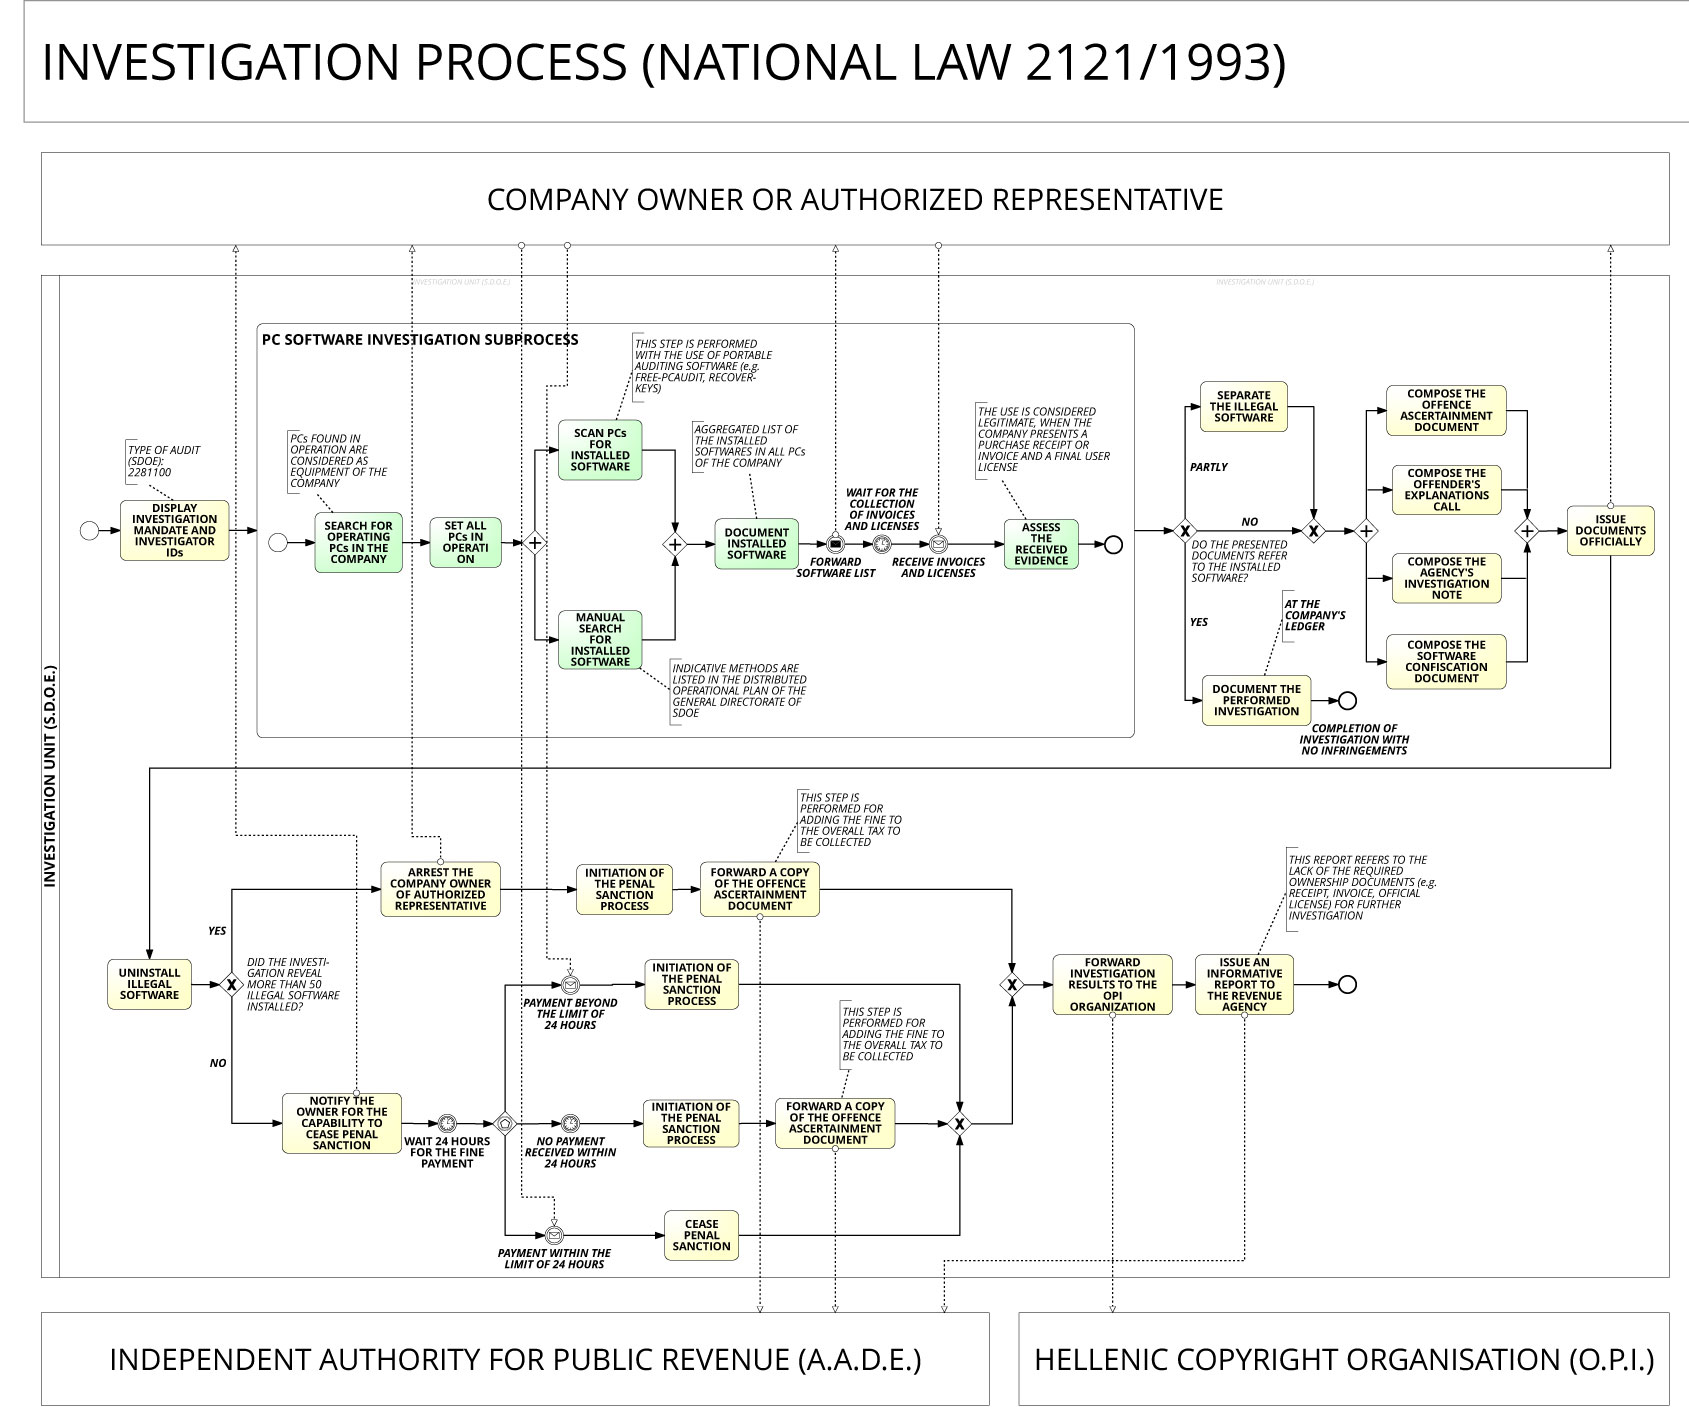 Figure 1: Investigation Process for IP infringements related to illegal software usage (National Law N.2121/1993).